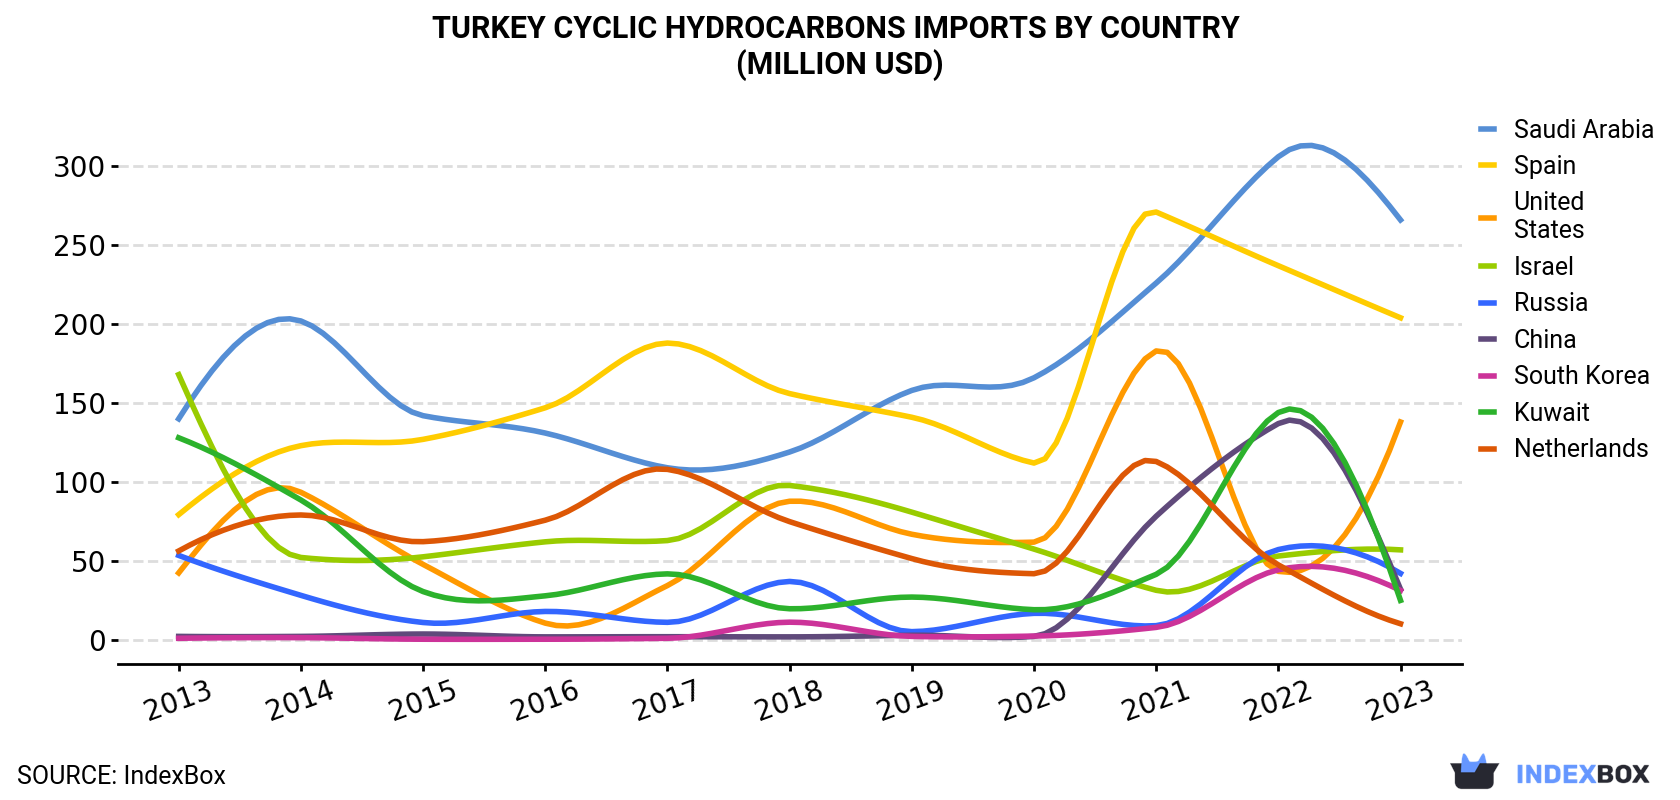 Turkey Cyclic Hydrocarbons Imports By Country (Million USD)